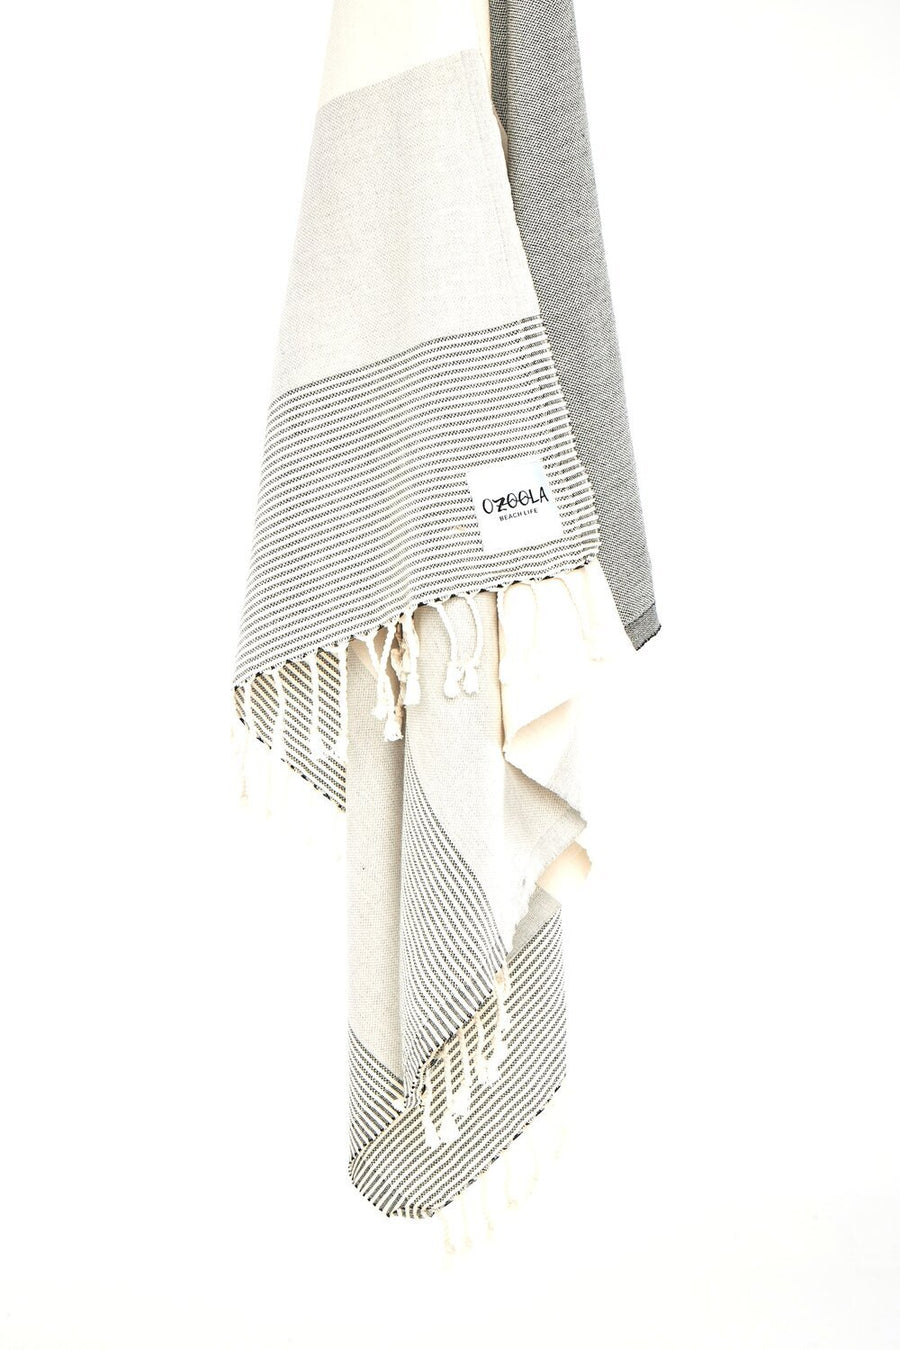 Ozoola Johnny Turkish beach towel in natural detail